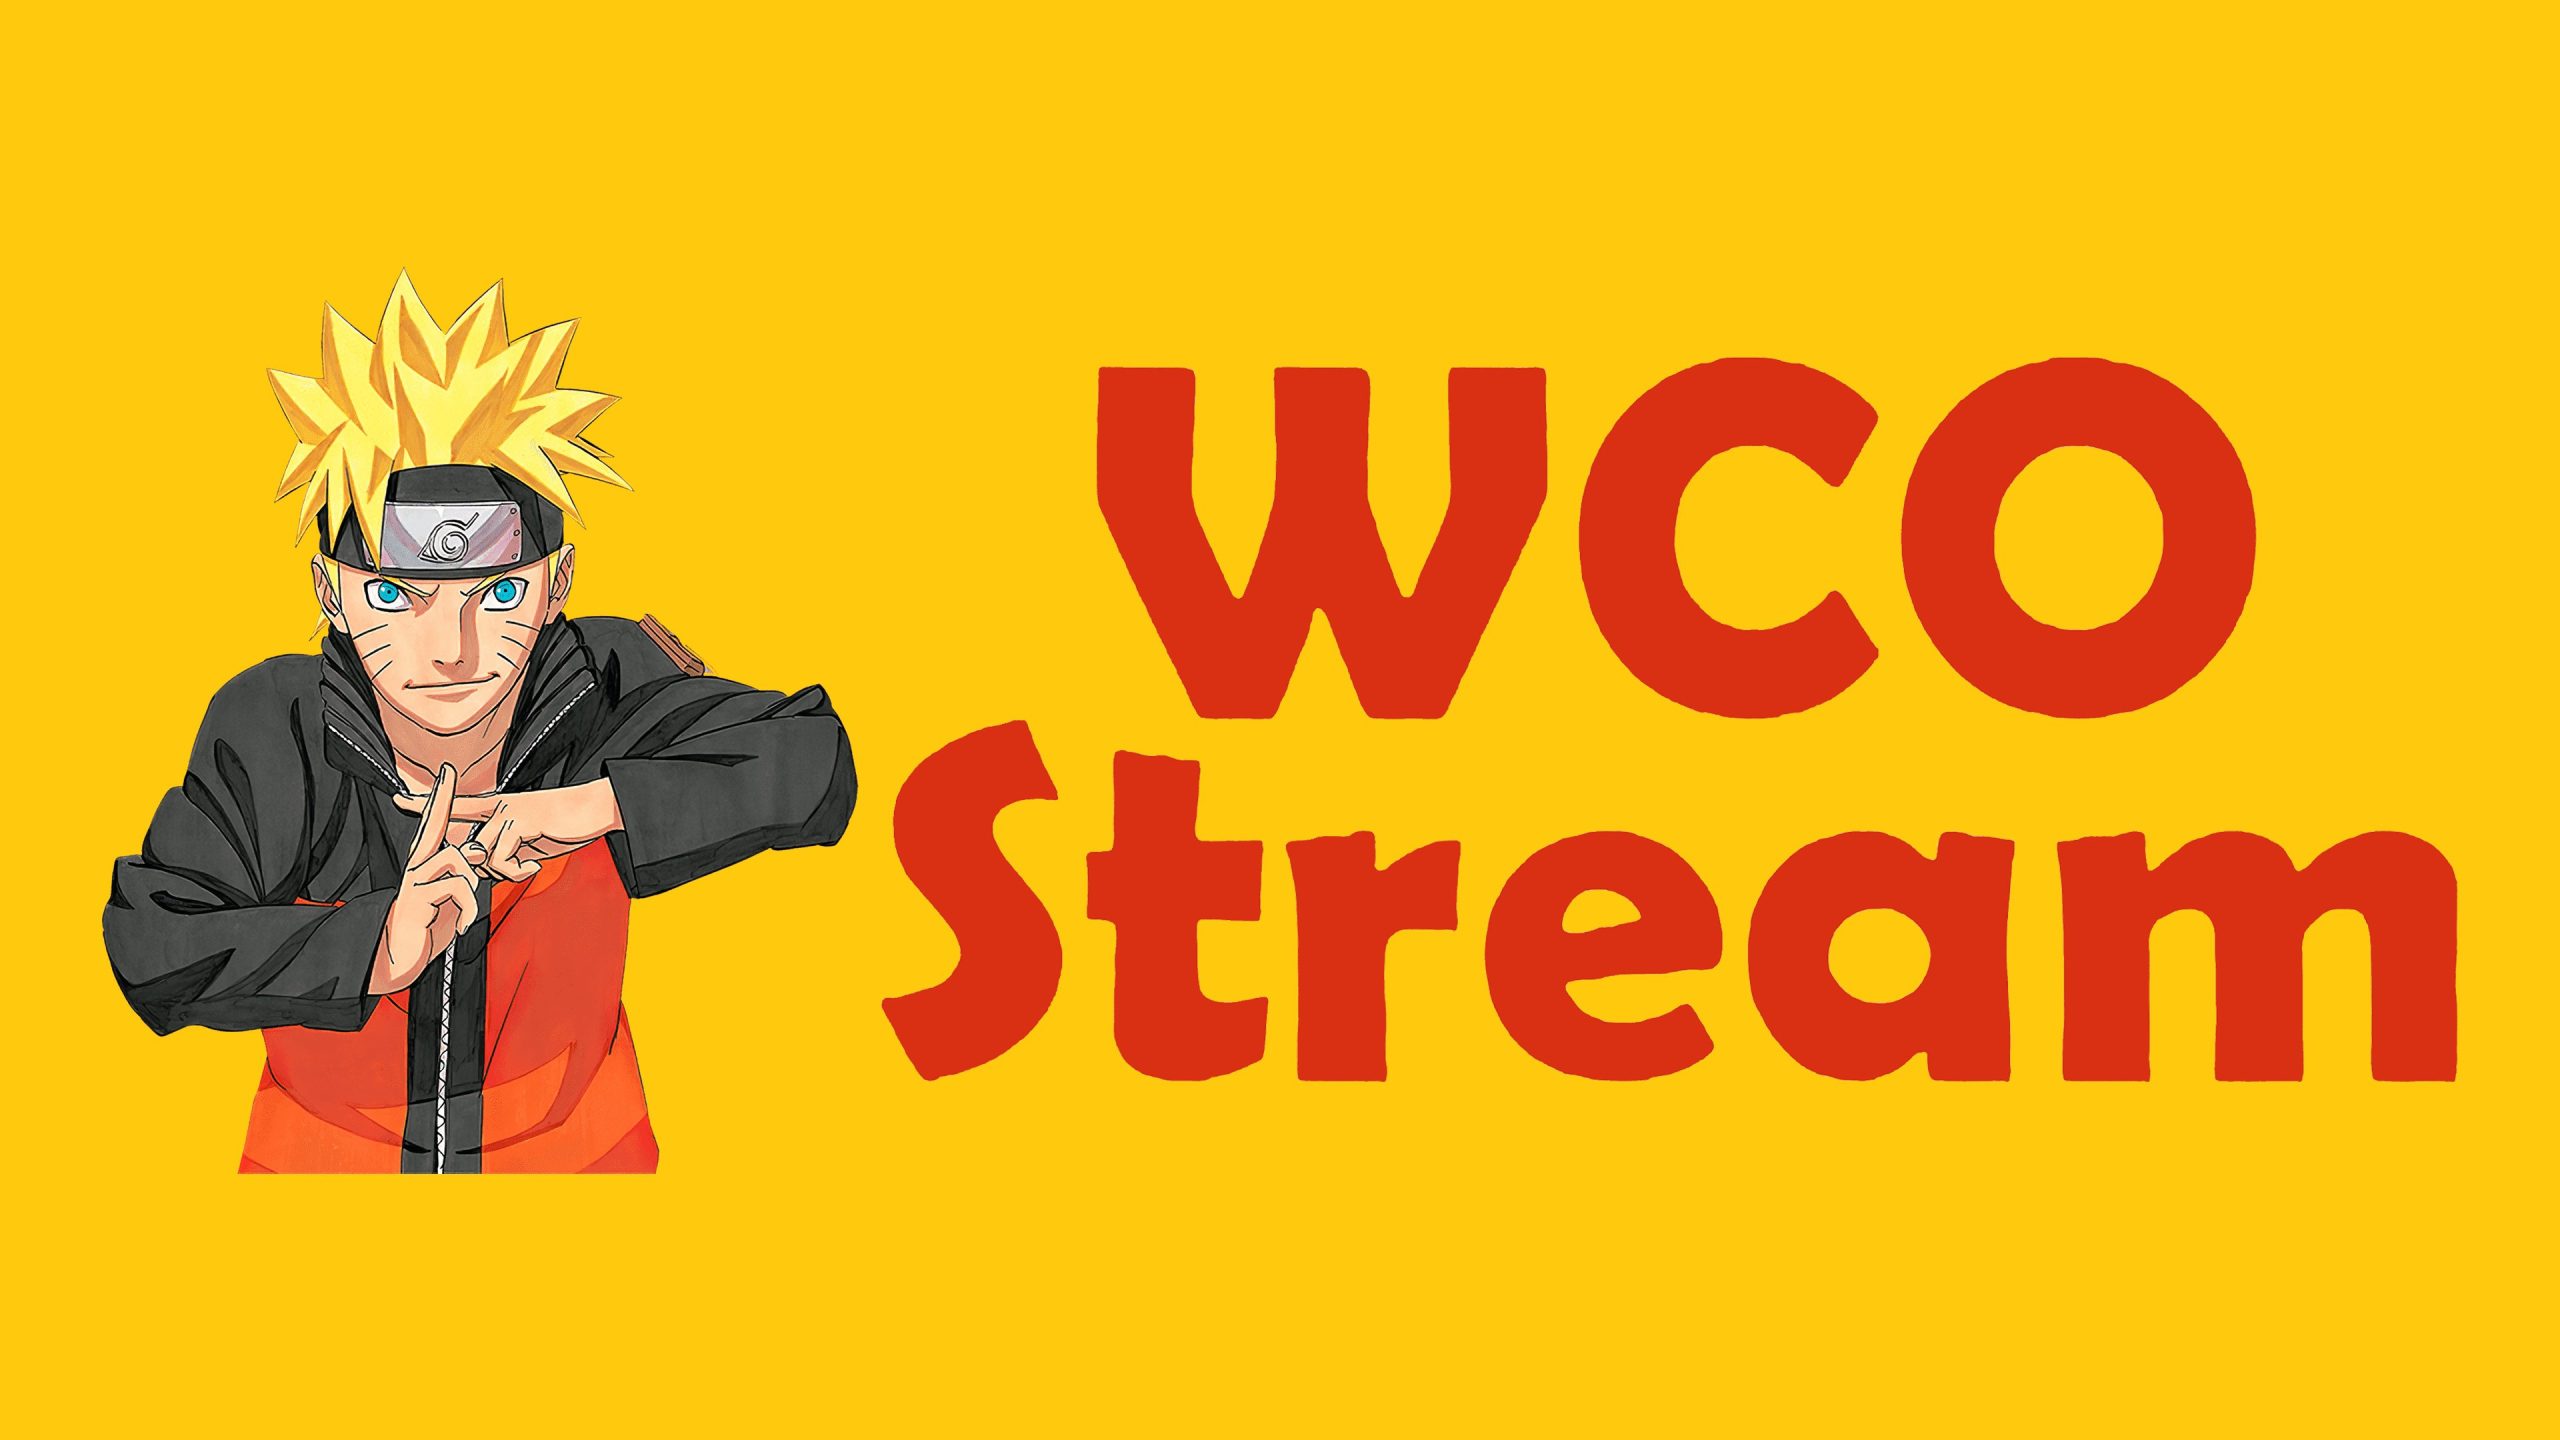 Wcostream - Watch And Download Anime/Cartoon For Free!